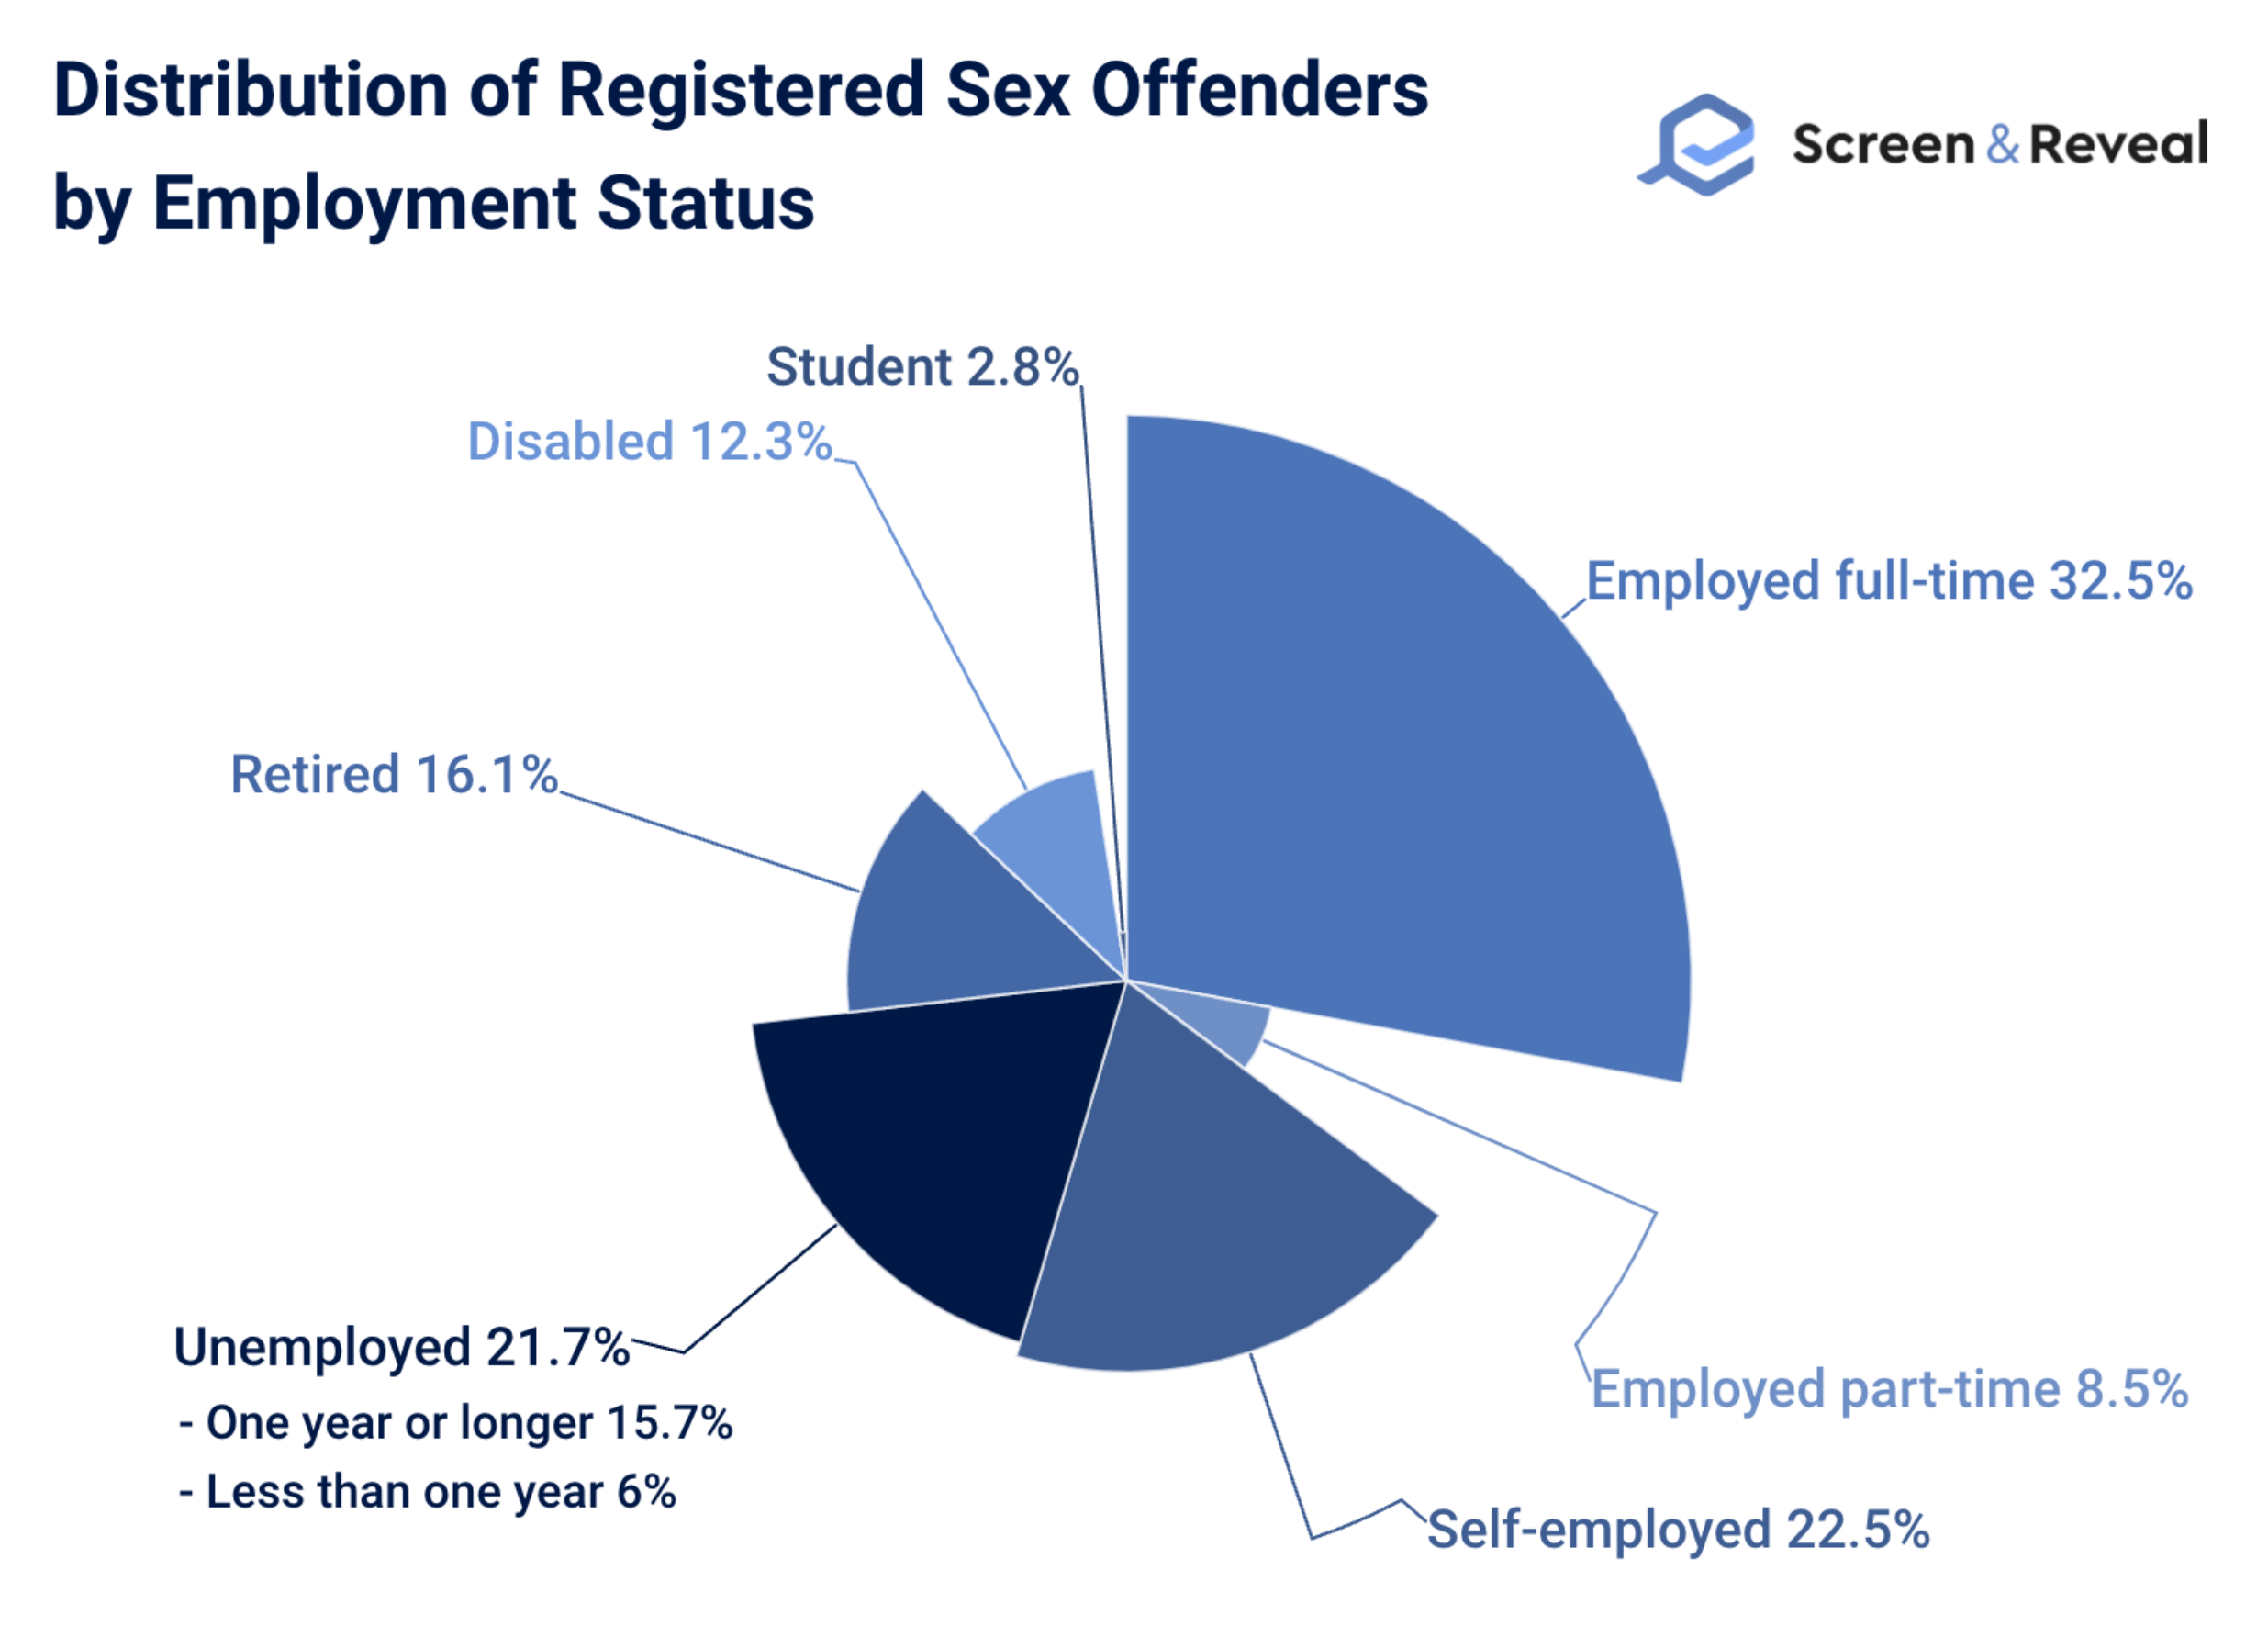 Distribution of Registered Sex Offenders by Employment Status